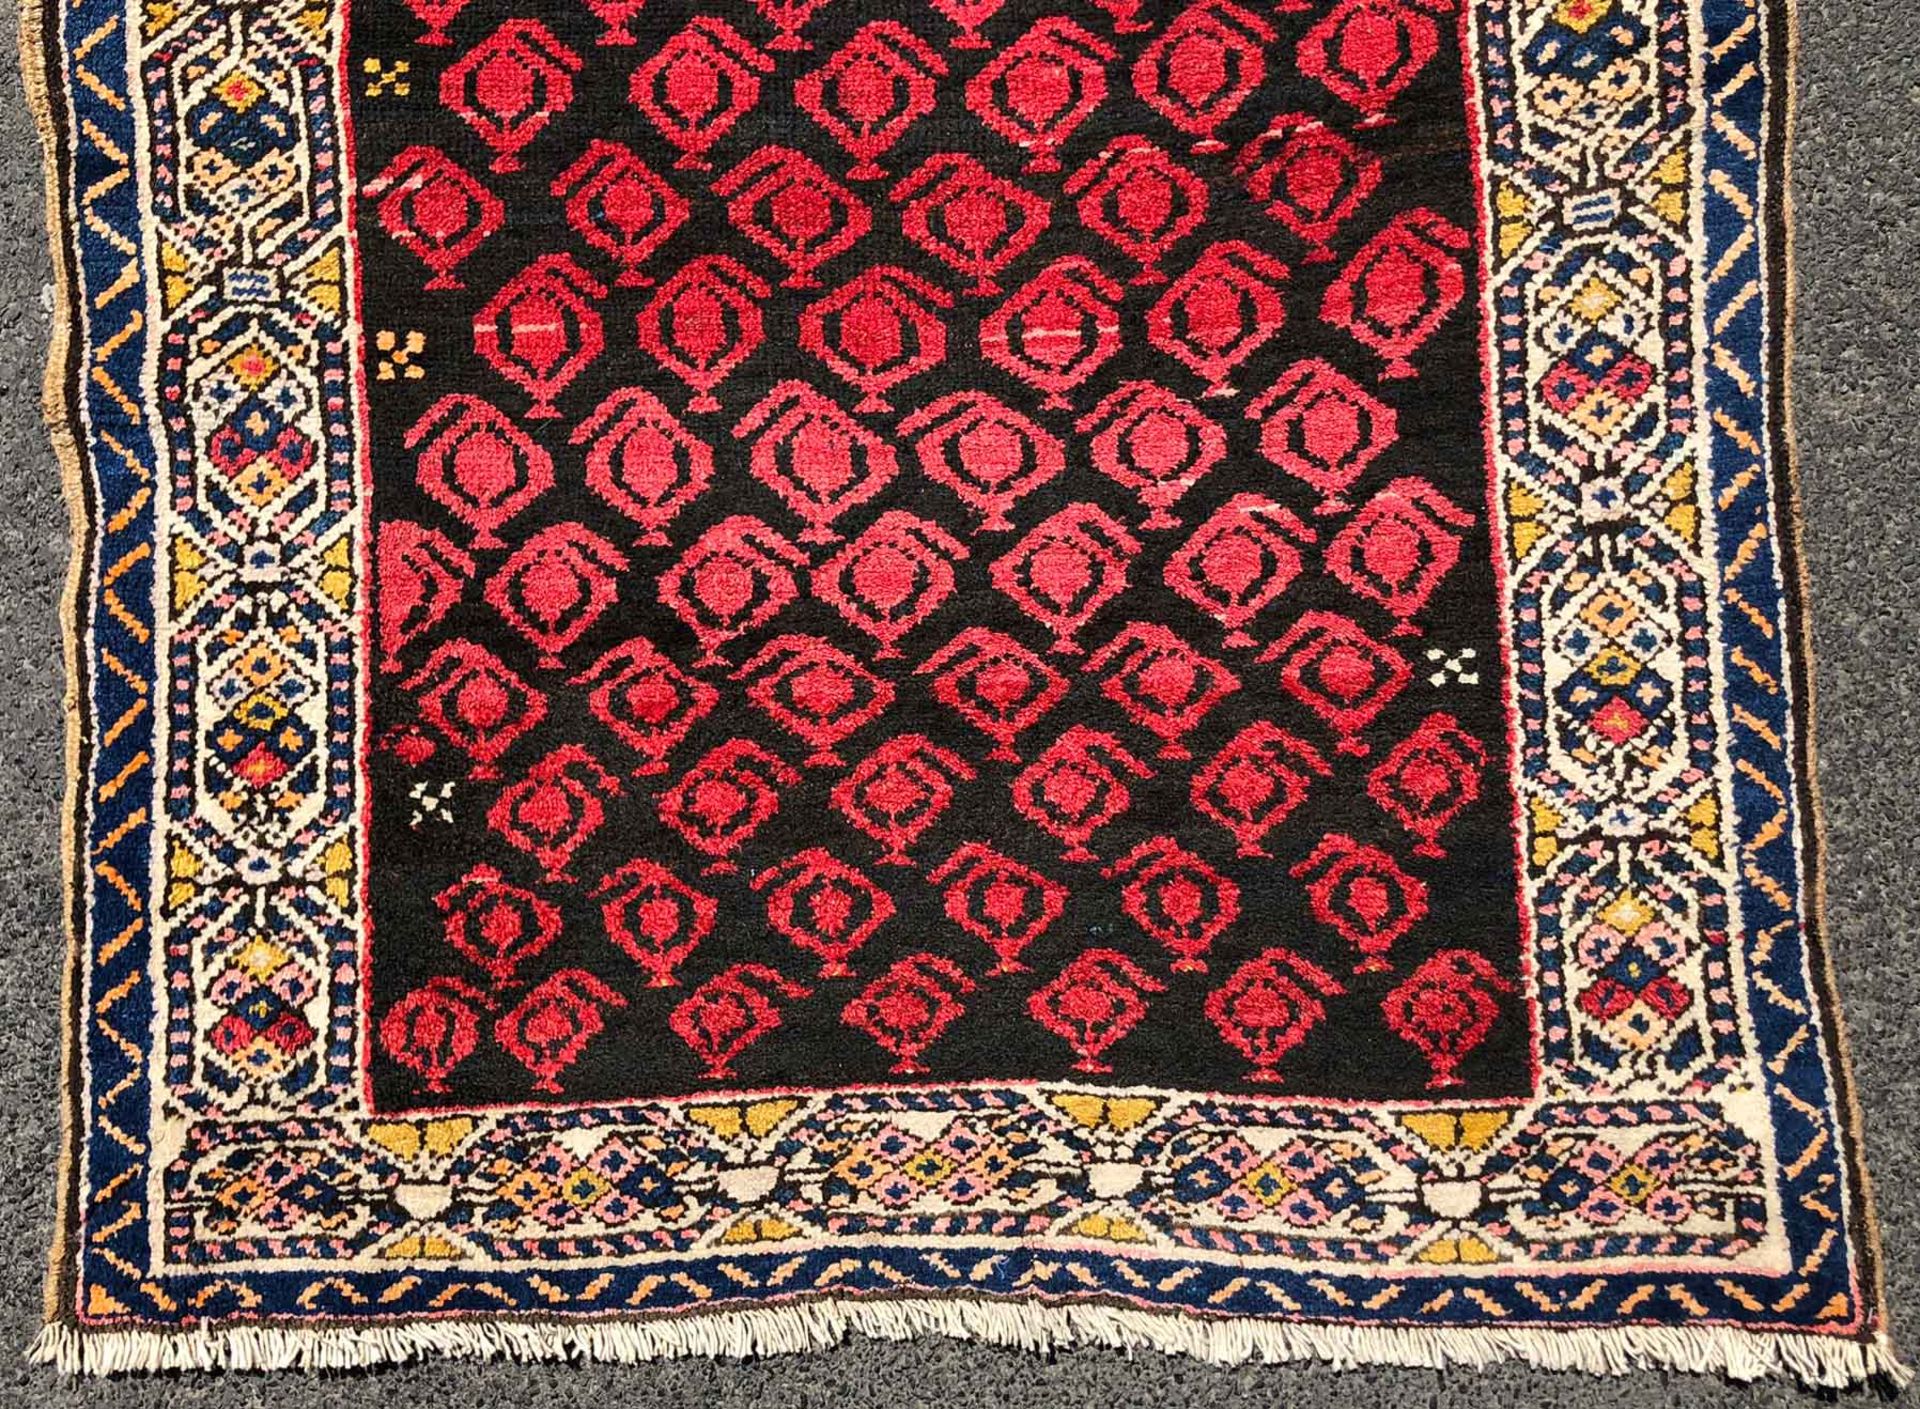 Hamadan Persian carpet. Iran. Antique, around 1910.352 cm x 108 cm. Knotted by hand. Wool on cotton. - Image 2 of 8